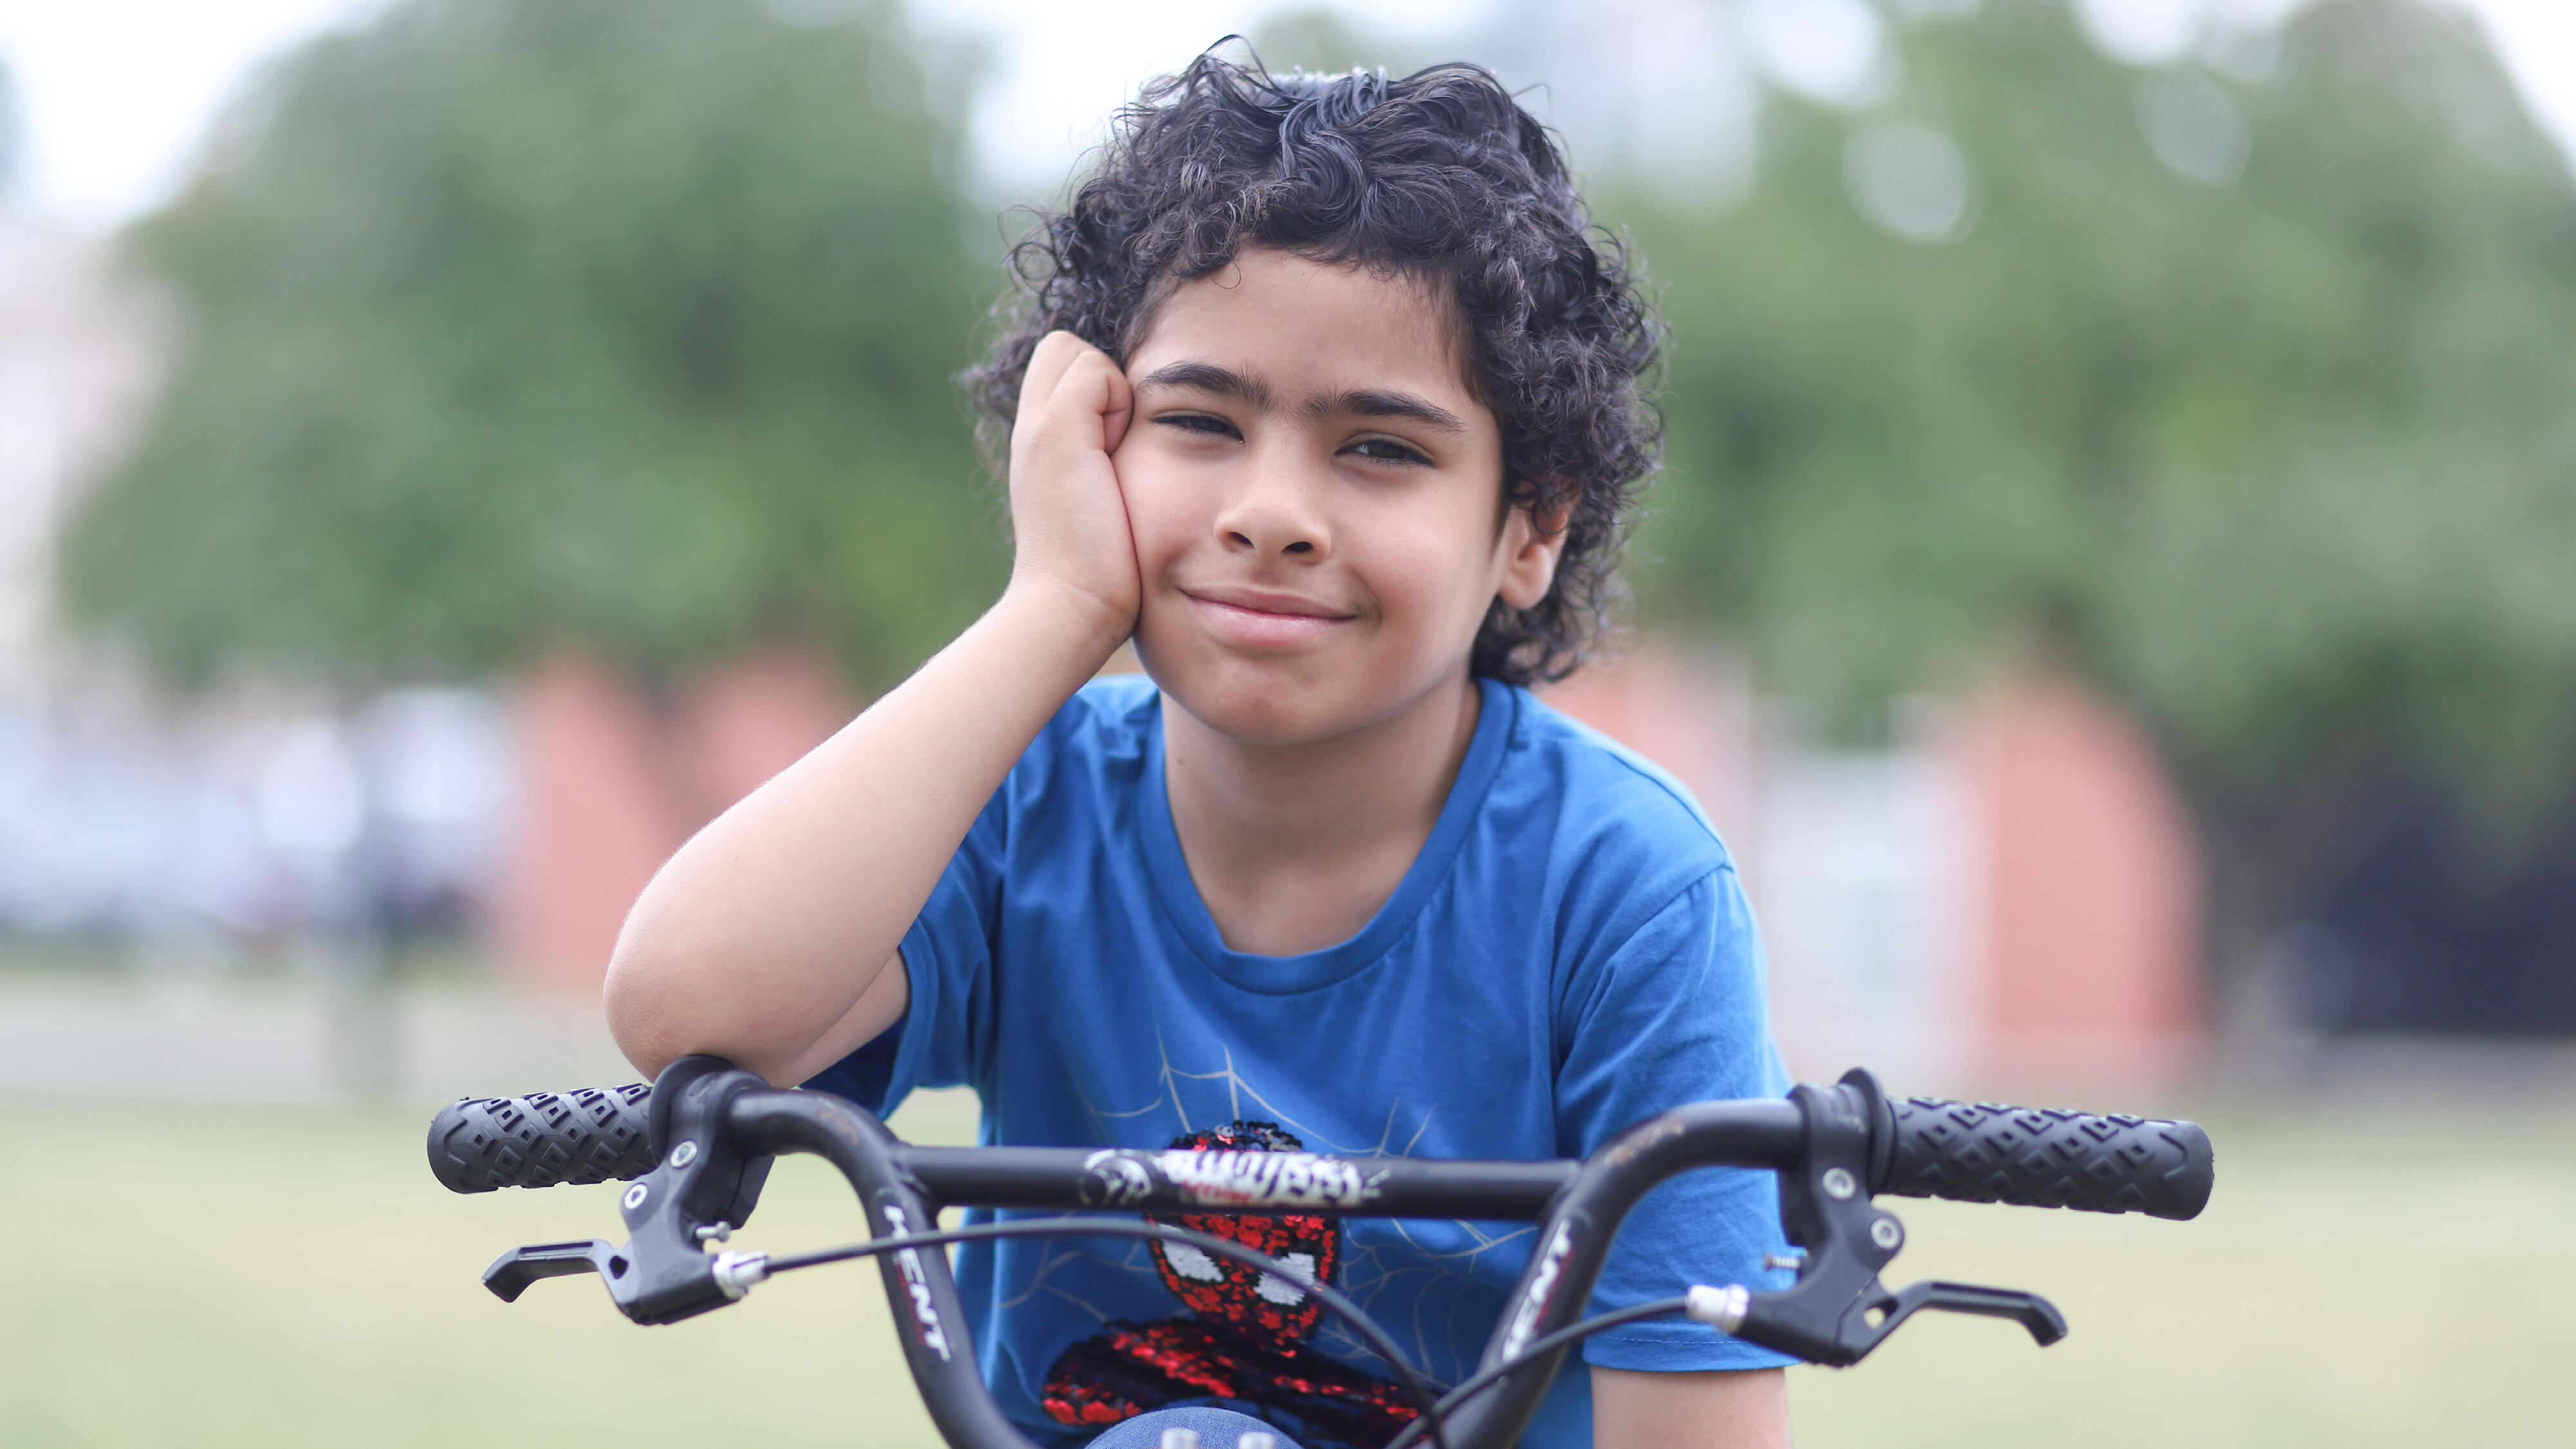 Student smiling while resting on a bike